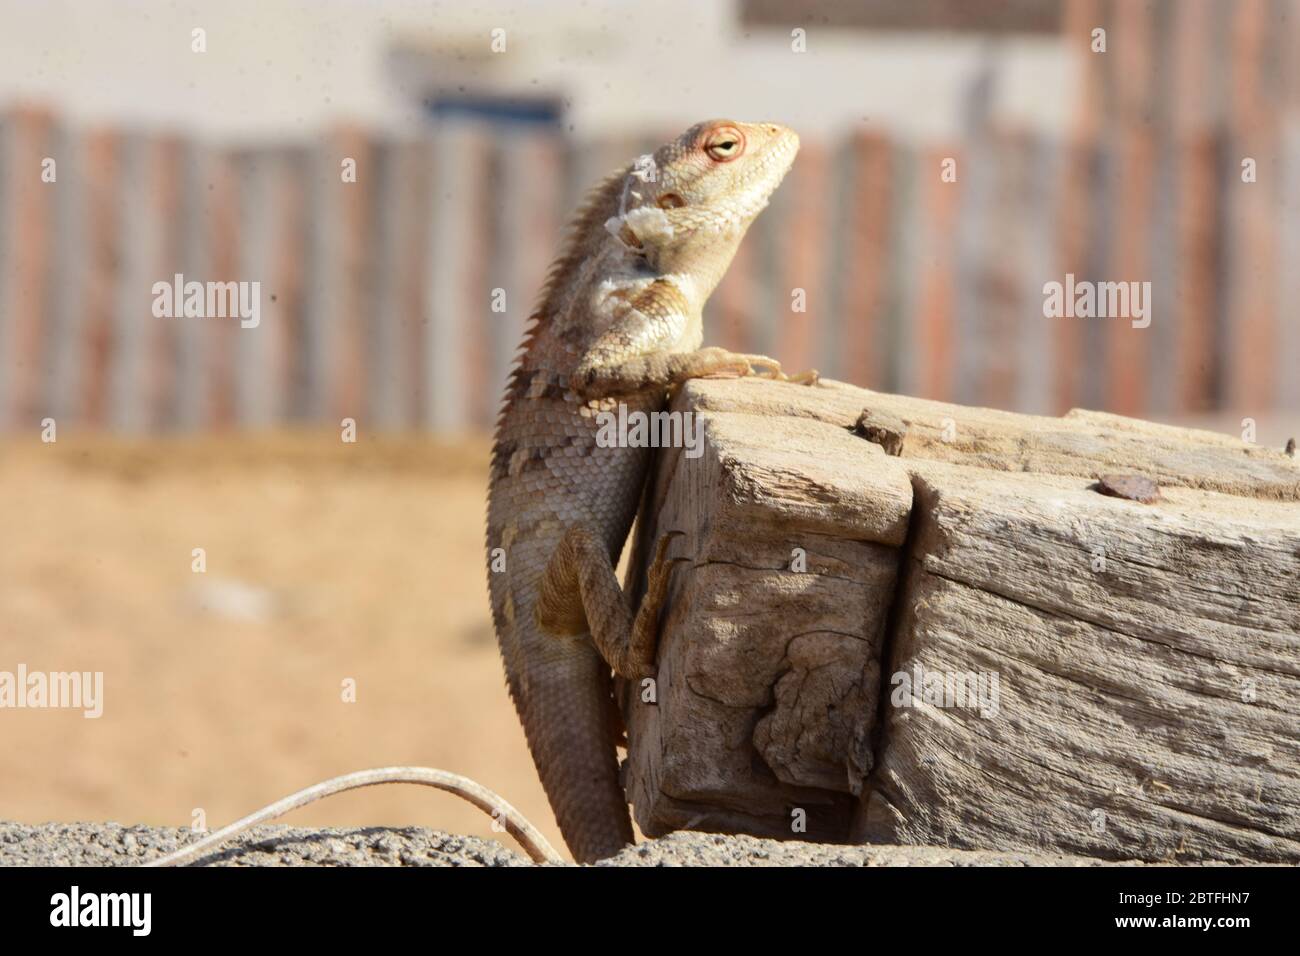 A chameleon sitting on a wood looking for food Stock Photo